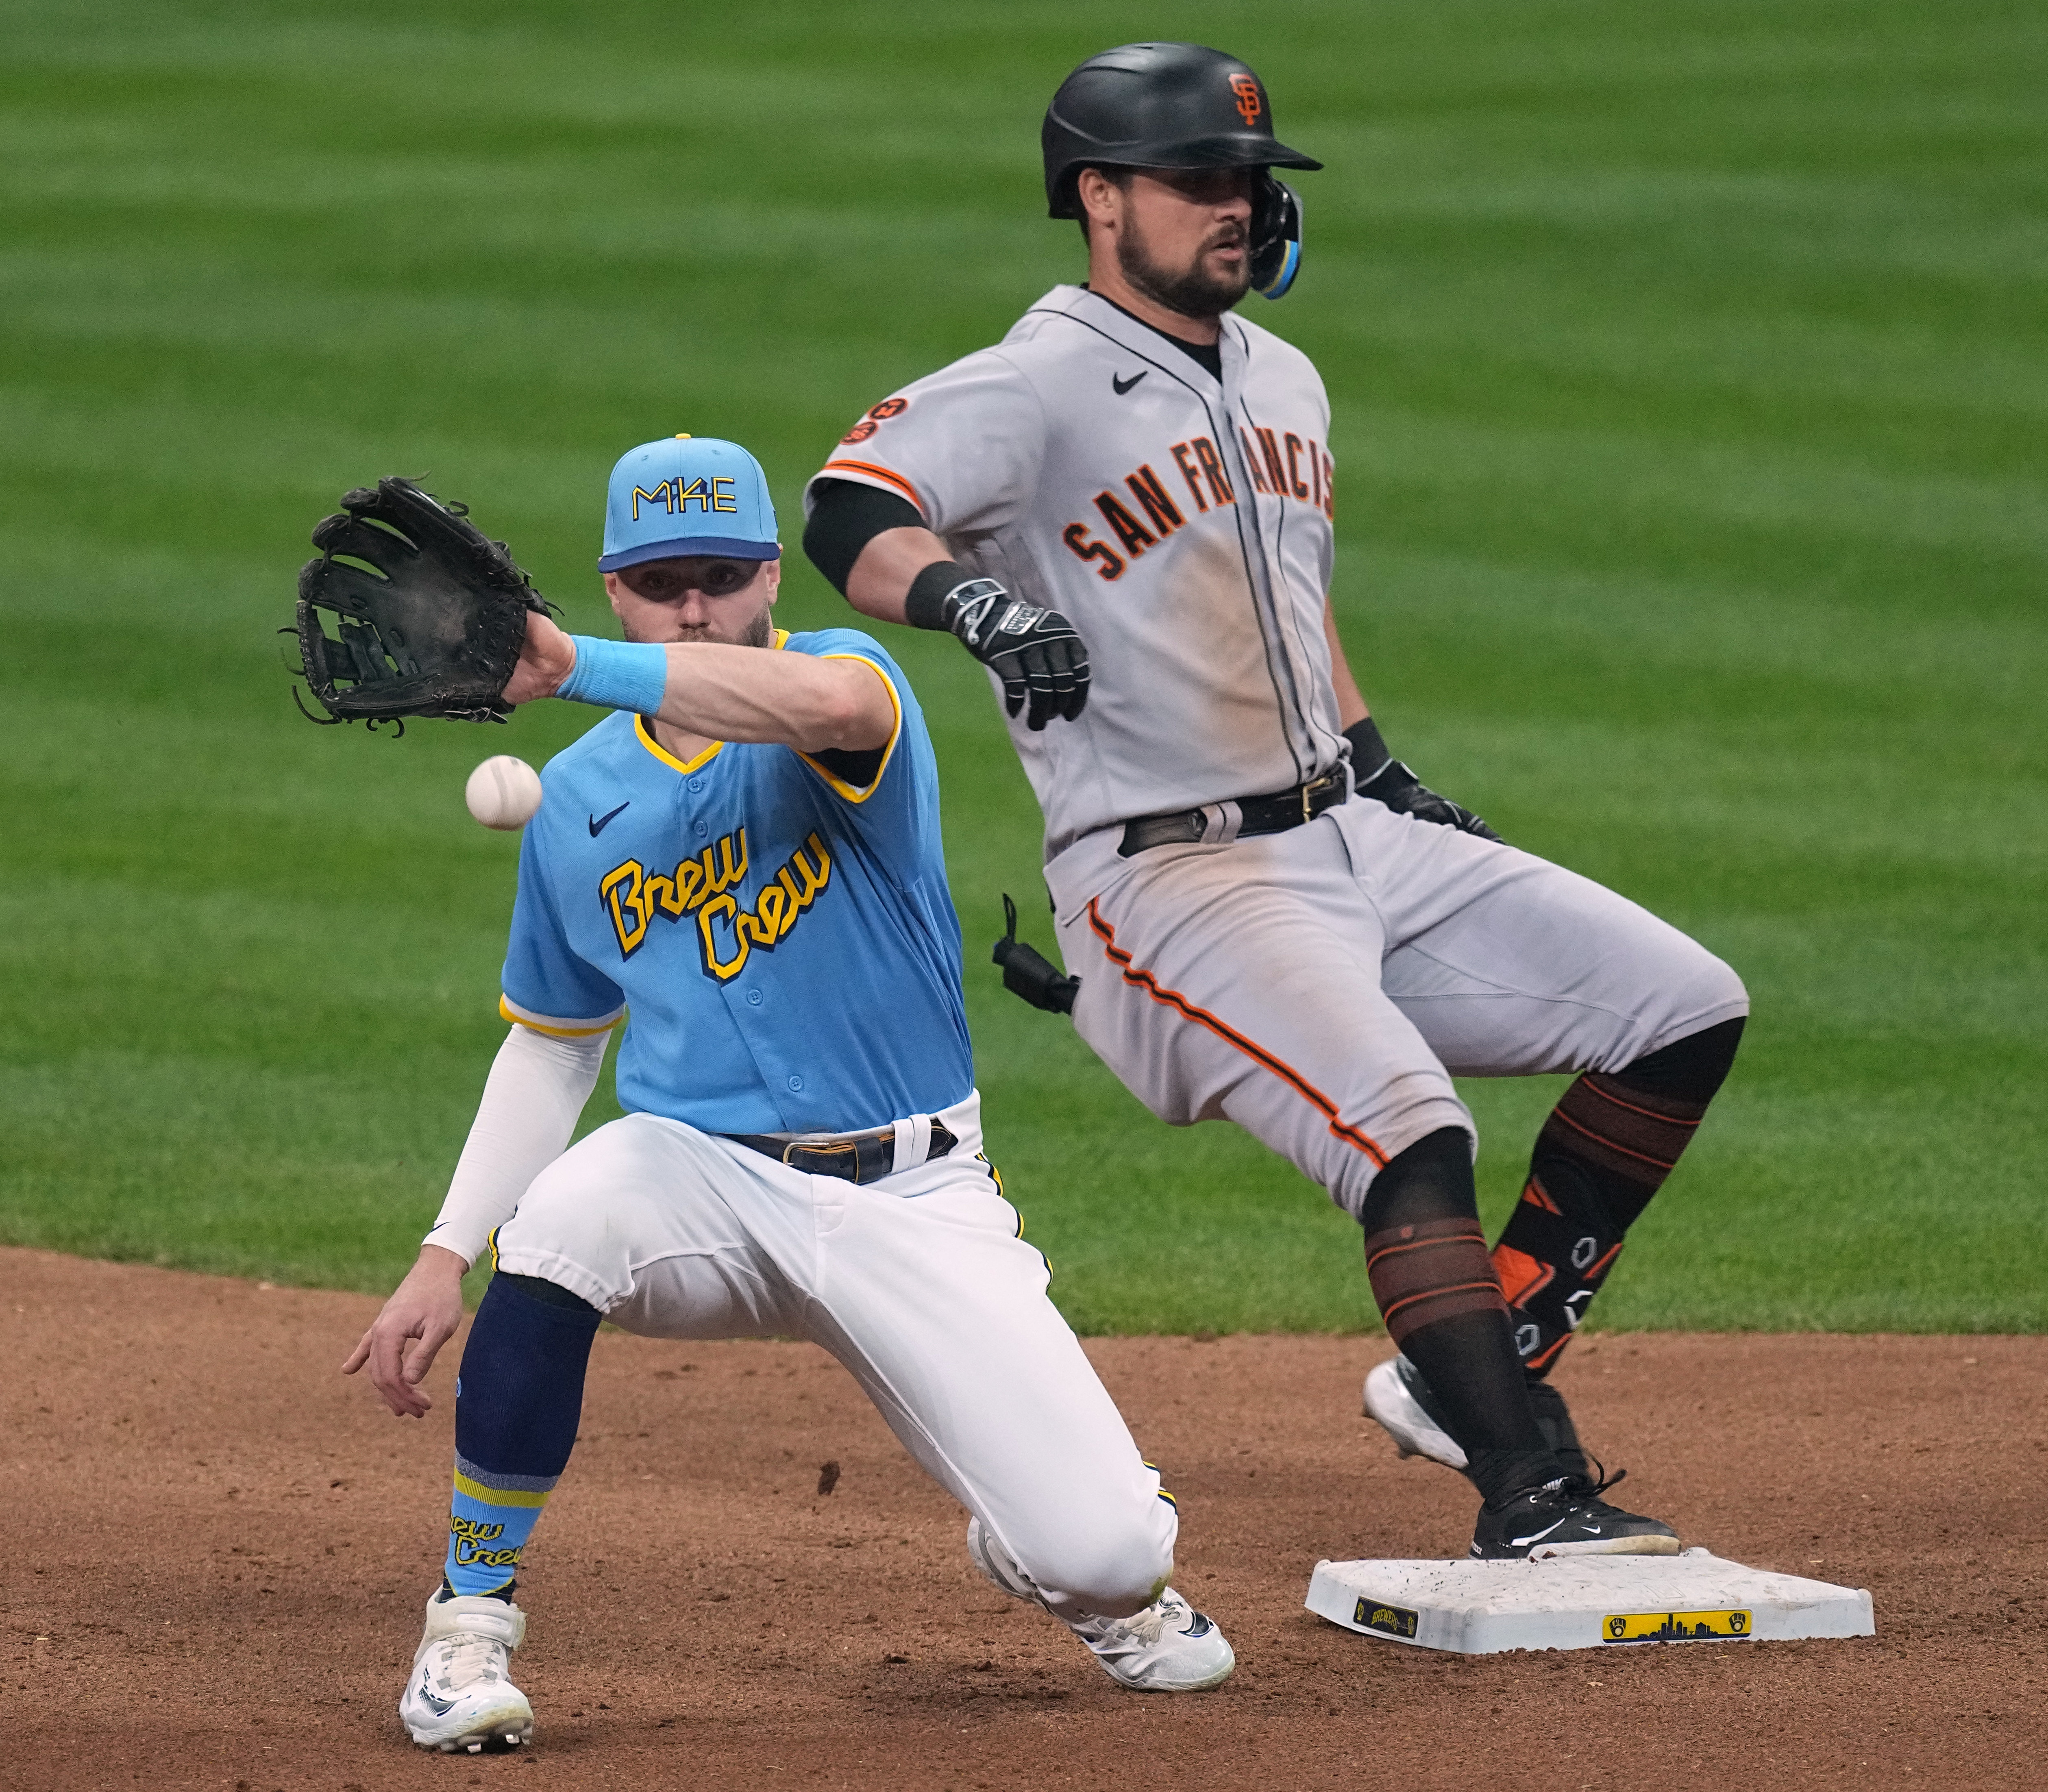 Giants move above .500 with rout of Brewers